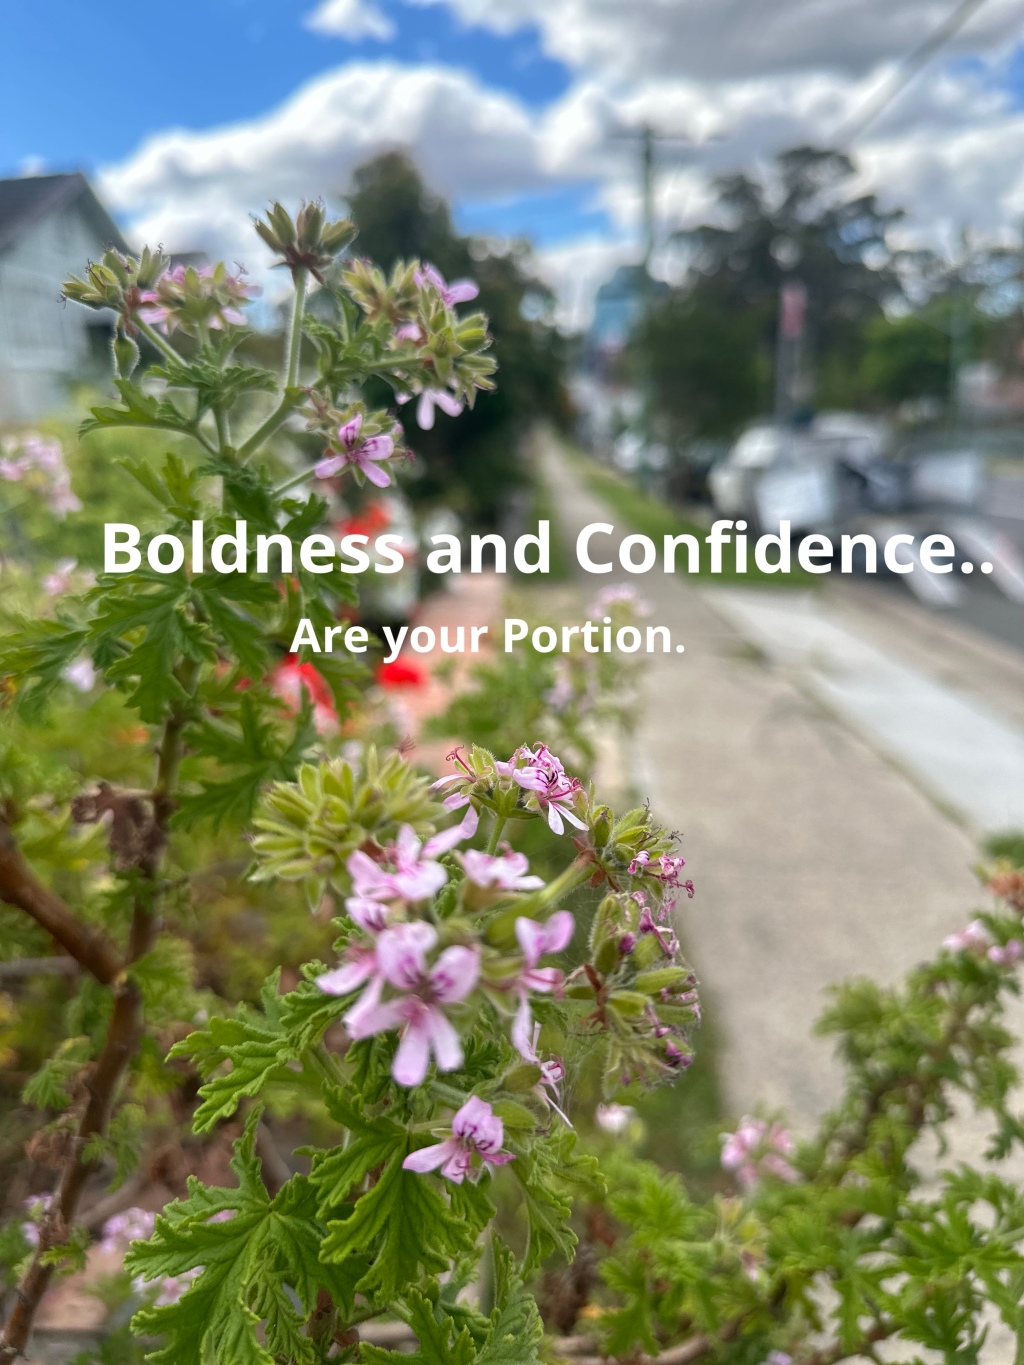 Boldness and Confidence are your Portion